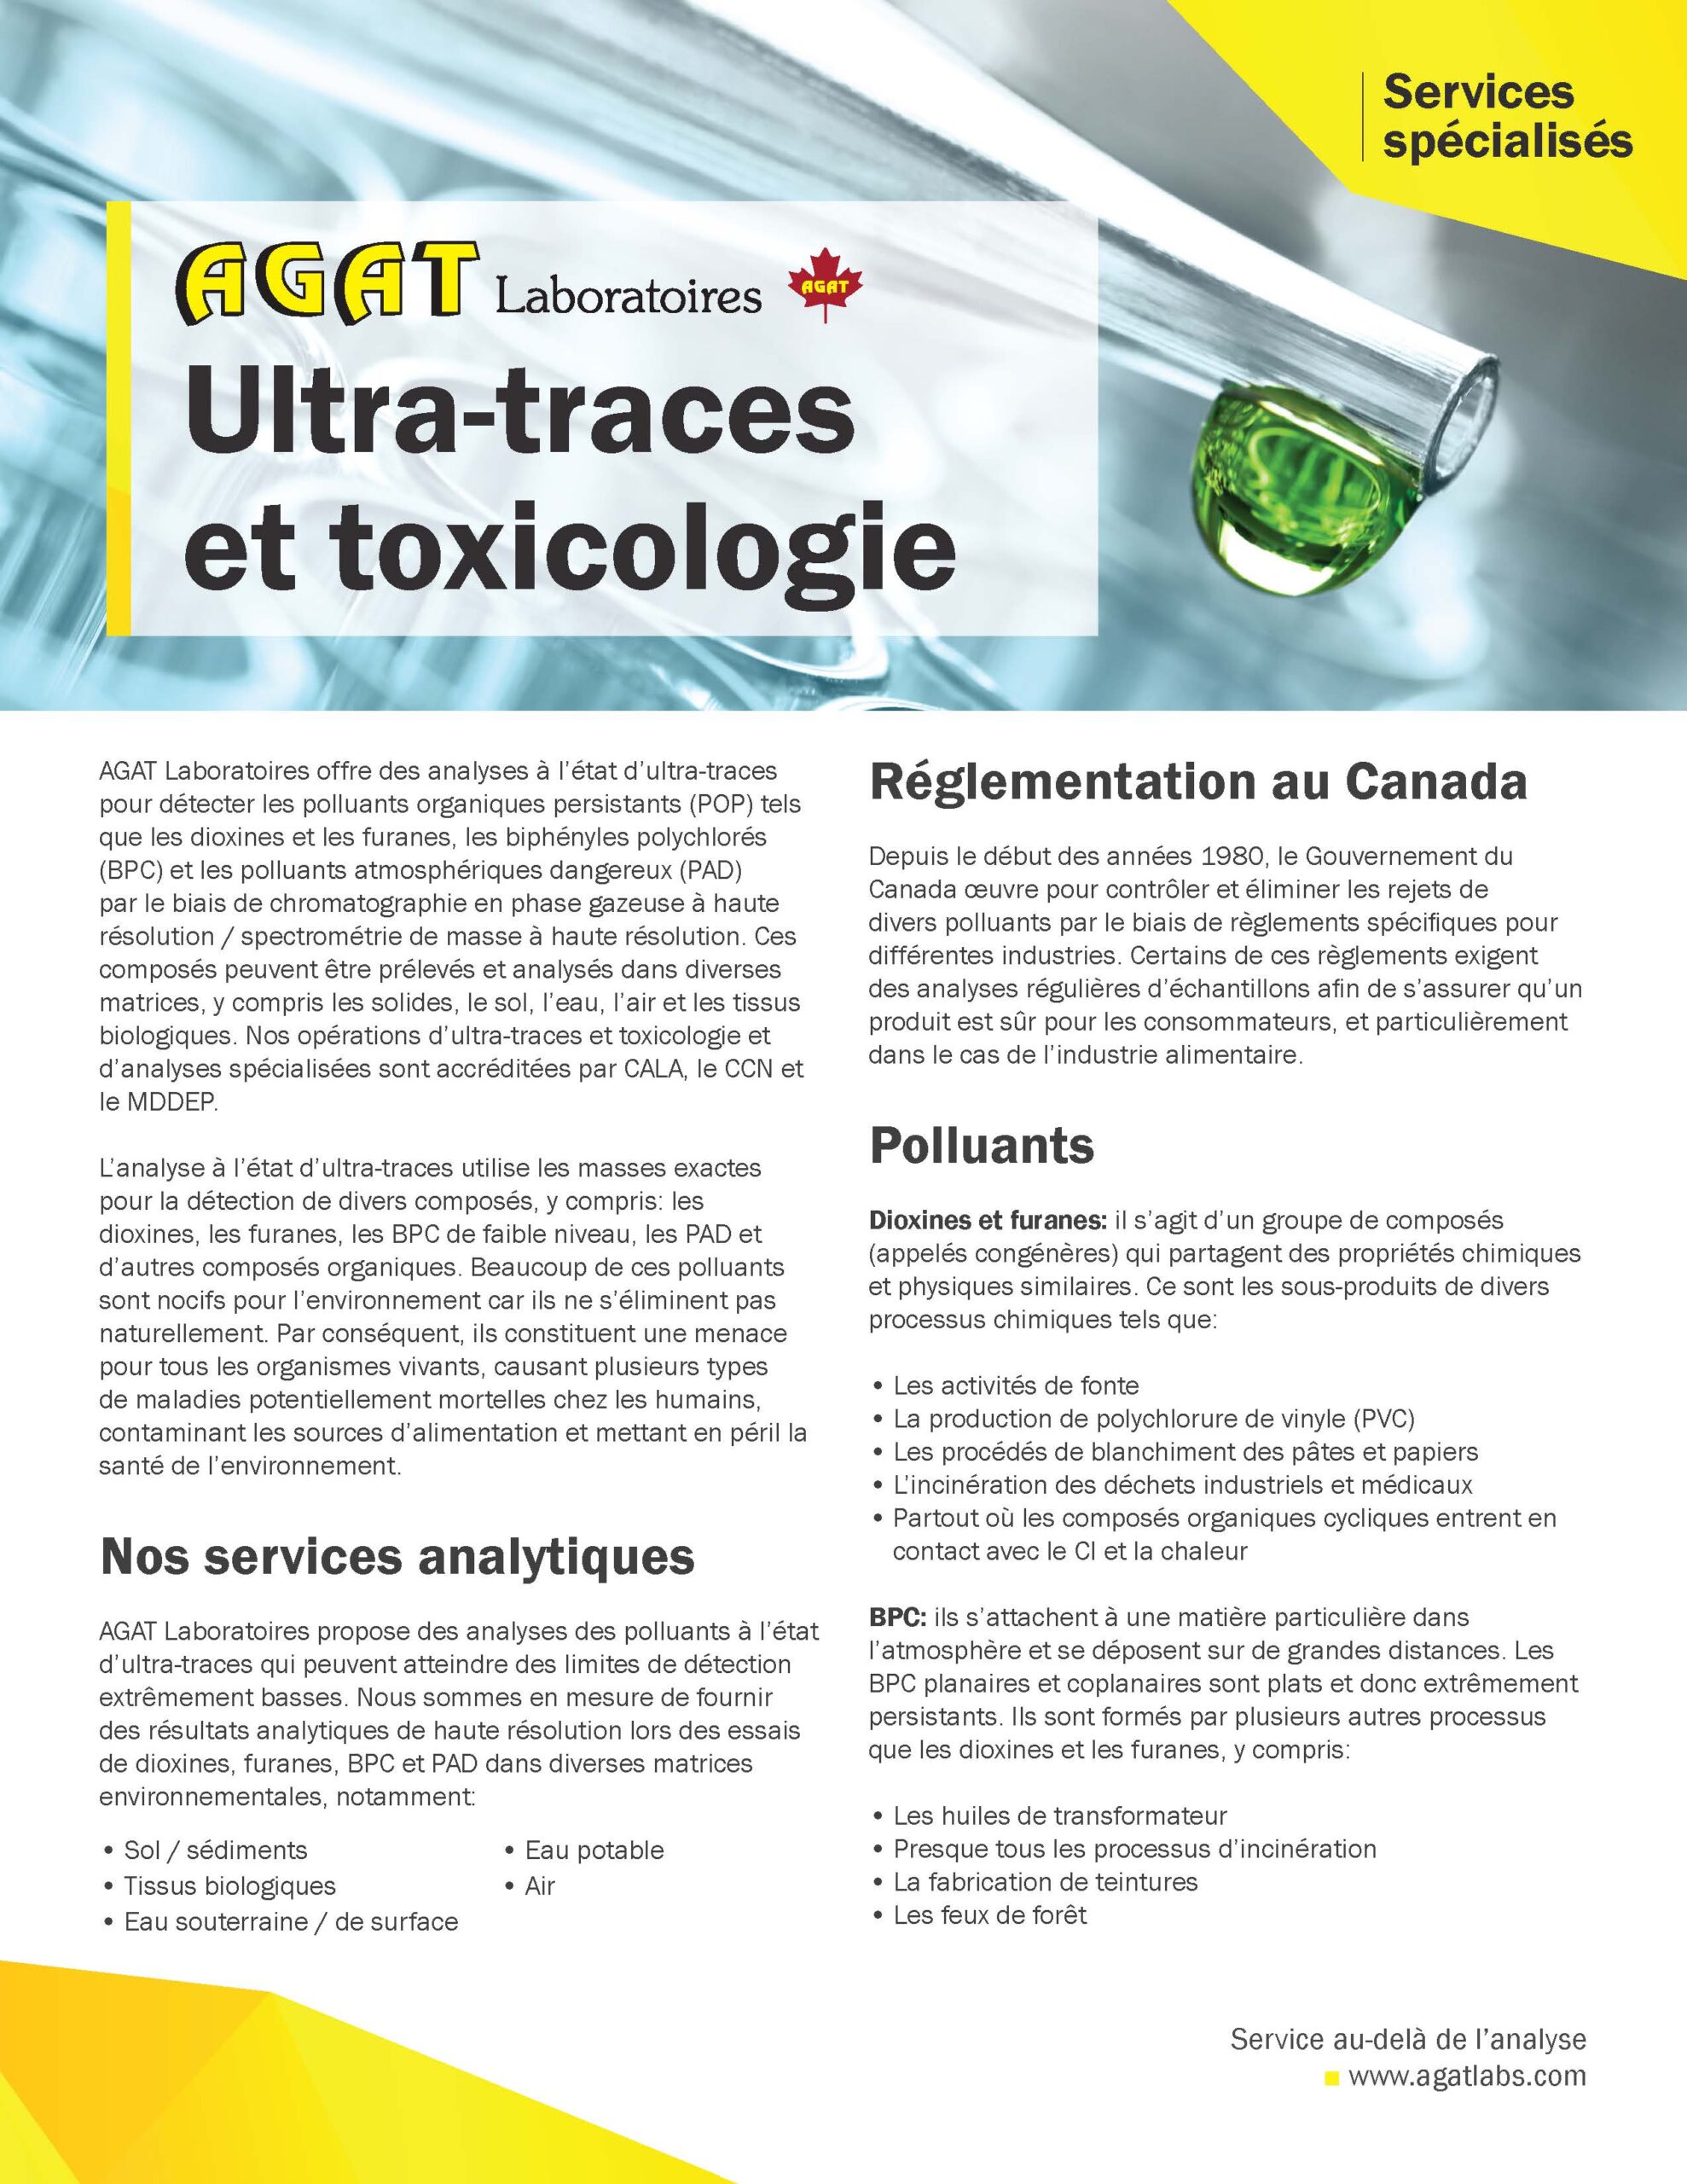 brochure on ultra trace toxicolgy at agat labs